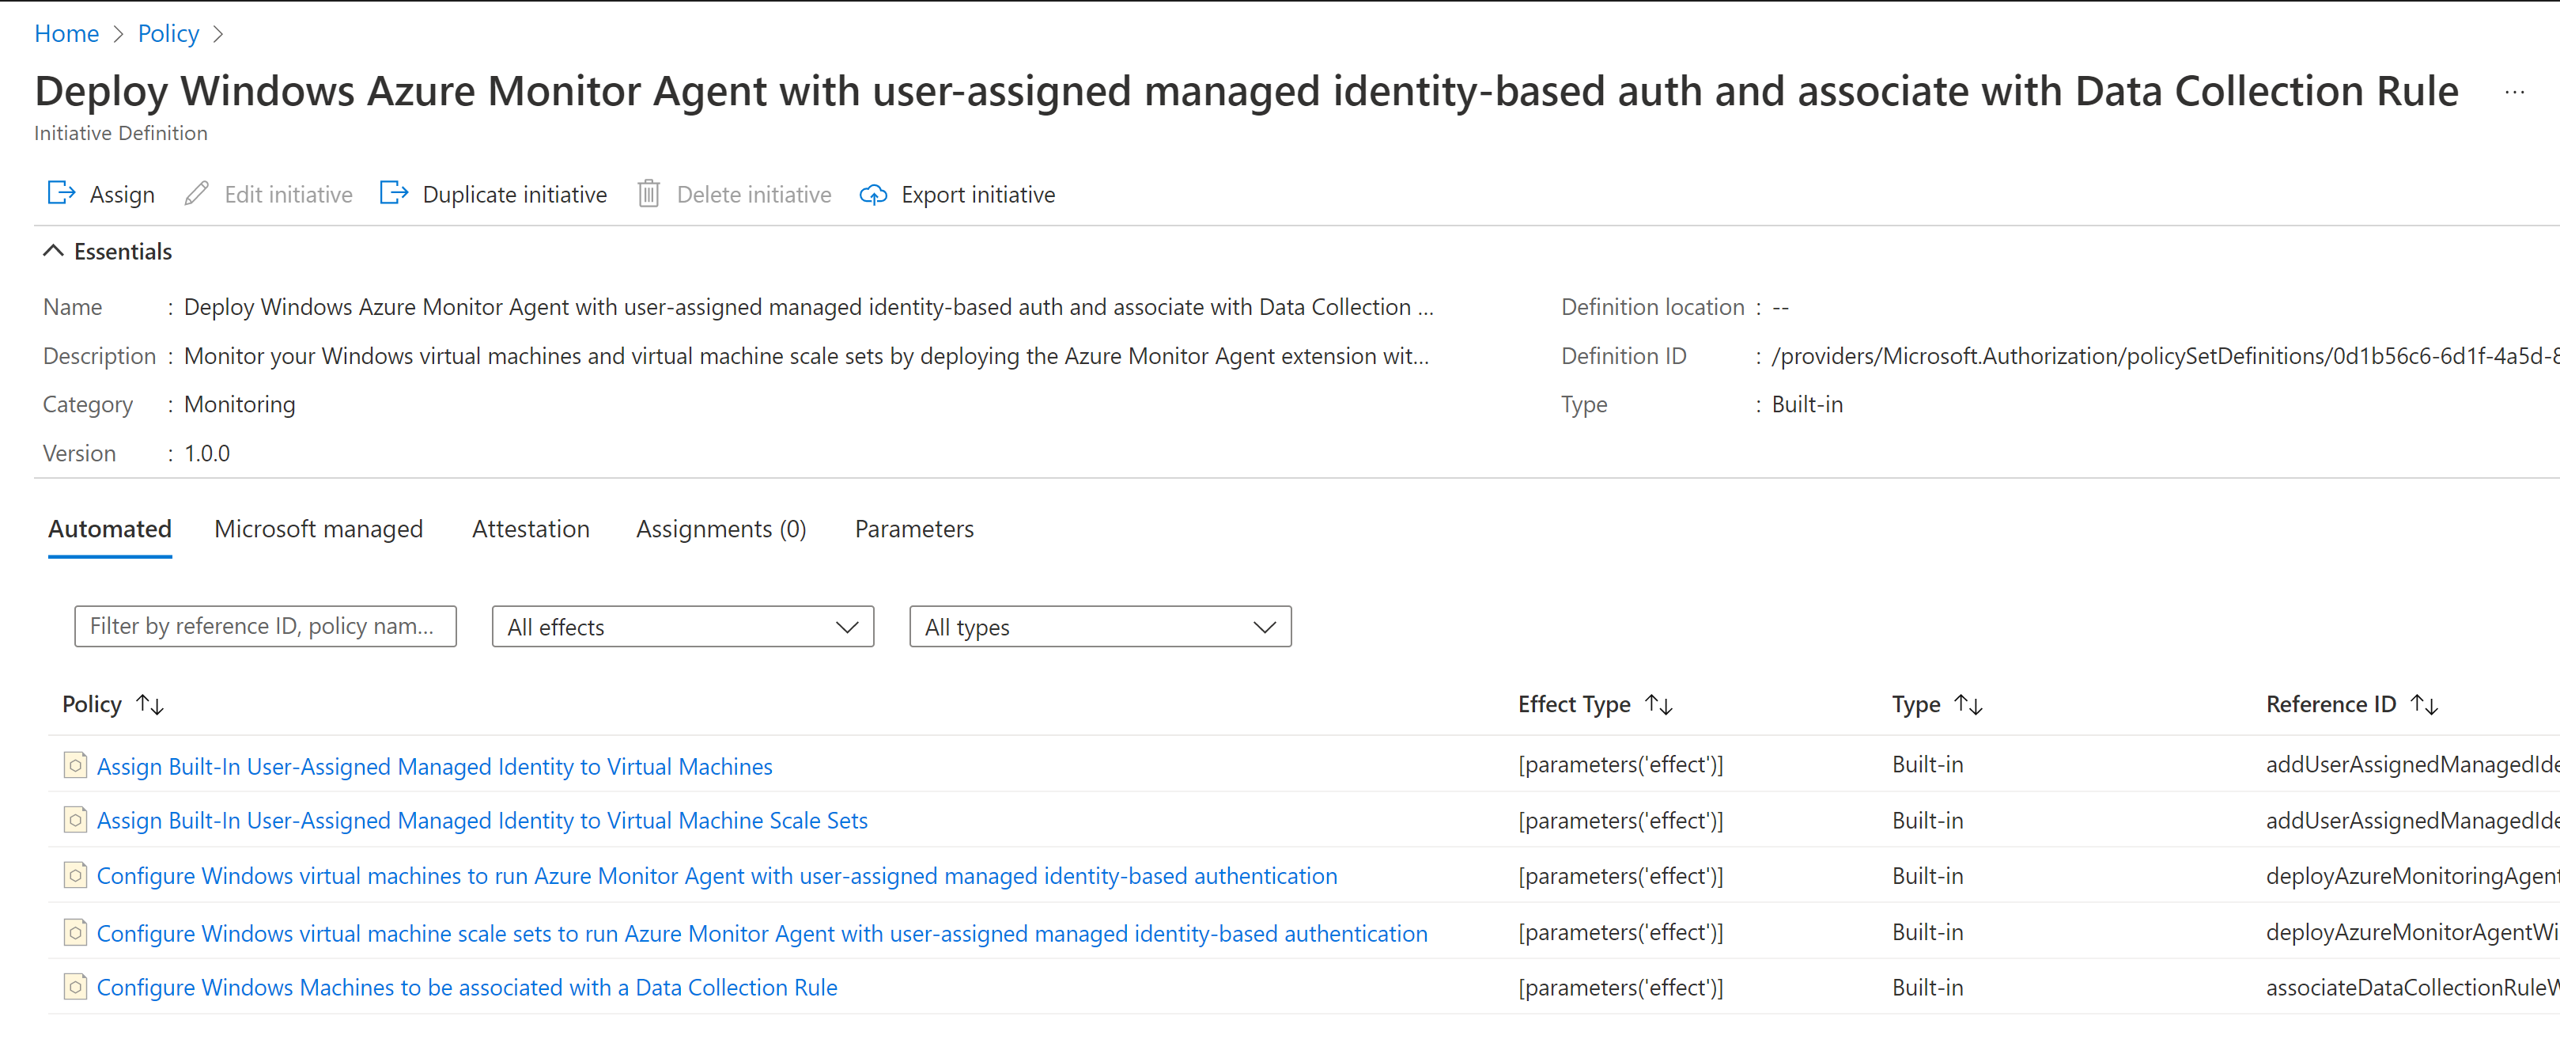 Partial screenshot from the Azure Policy Definitions page that shows two built-in policy initiatives for configuring Azure Monitor Agent.